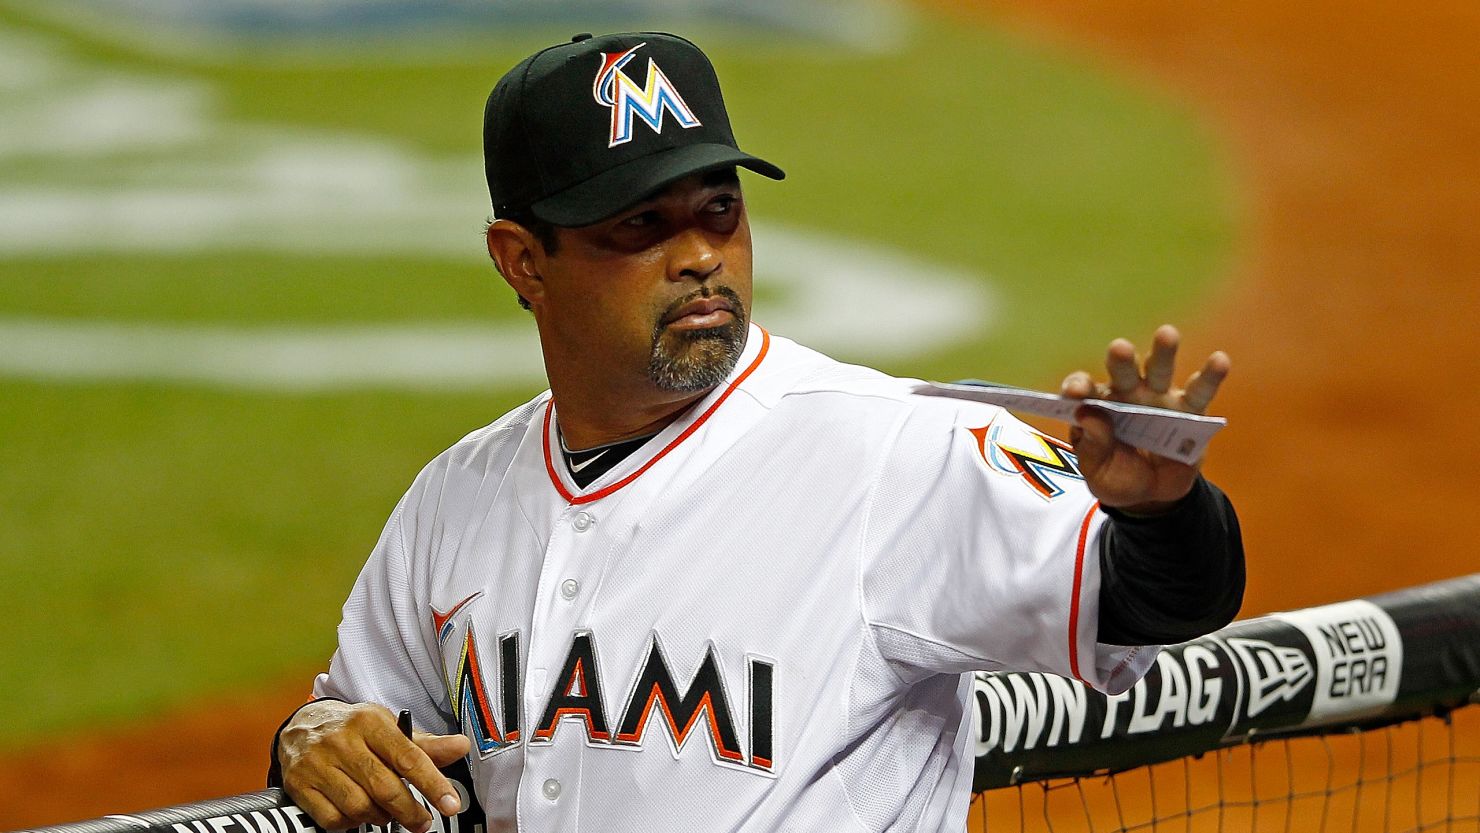 Marlins manager Ozzie Guillen has apologized, and been suspended for five games, after his remarks about Fidel Castro.